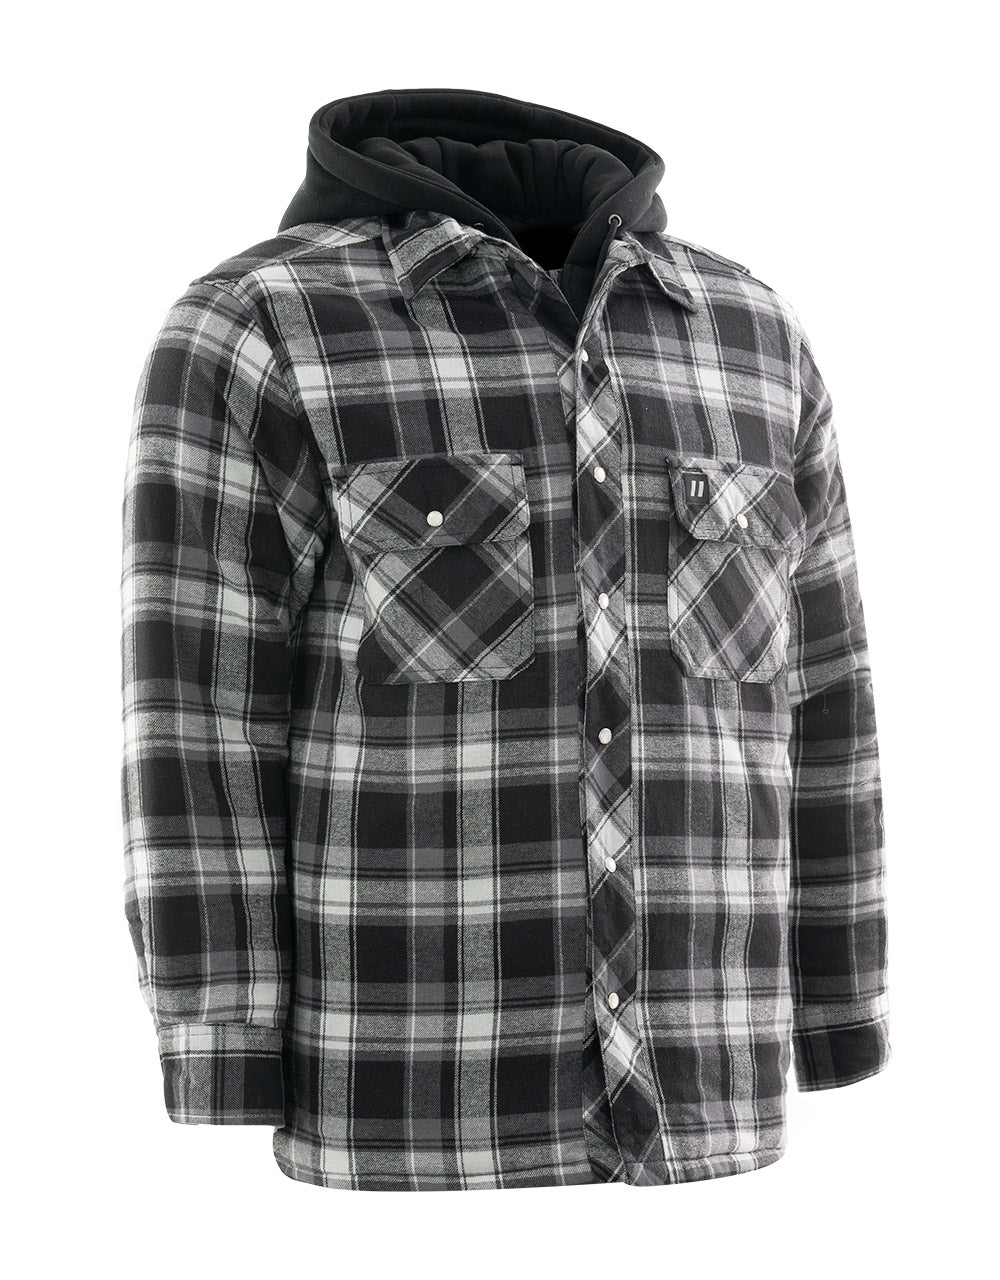 Women's Flannel Check Hoodie Jackets With Button Closure, Drawstring Hooded  Shirts, Autumn Coat Jackets With Pockets